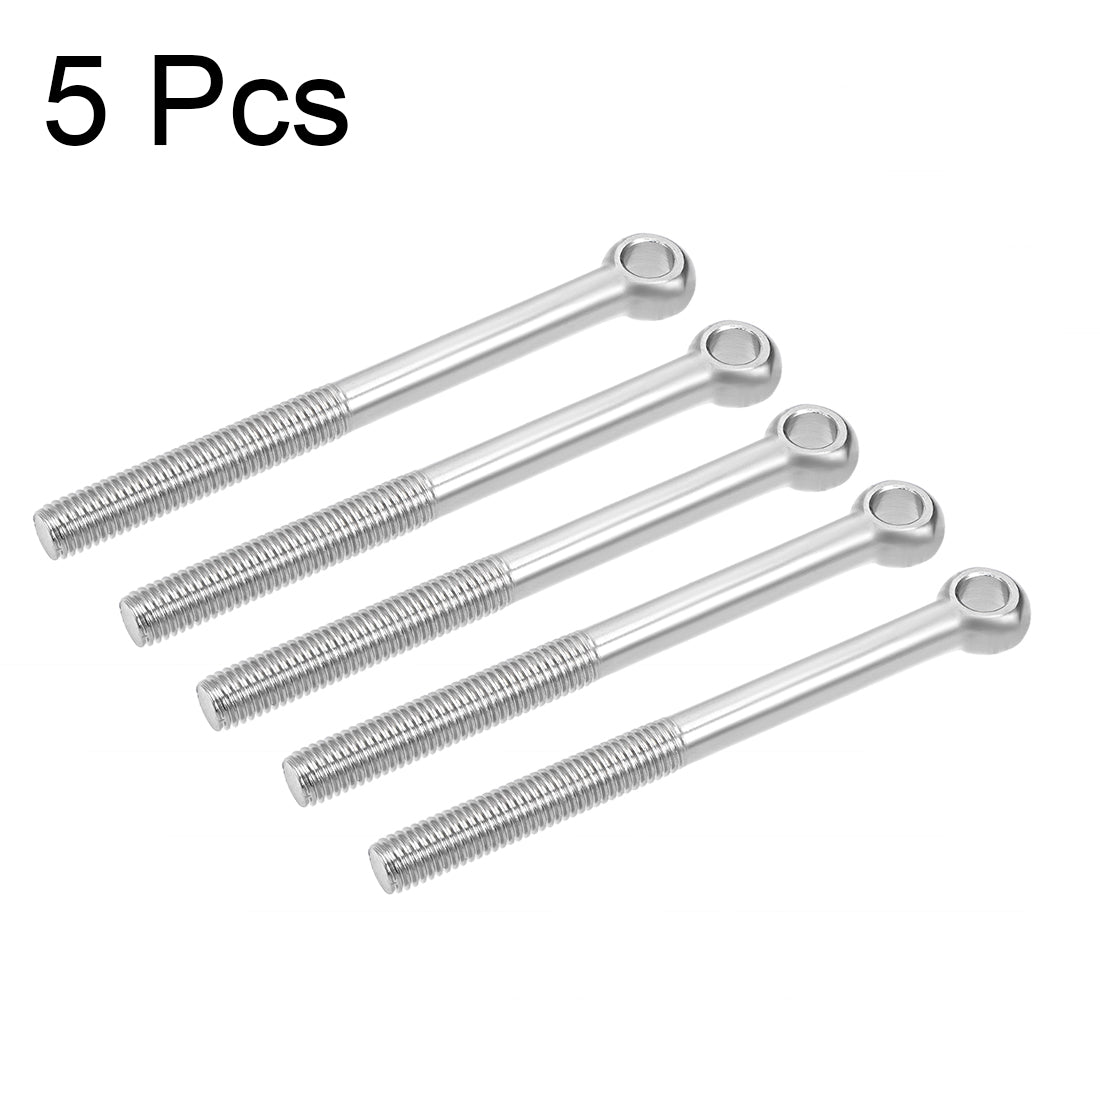 Uxcell Uxcell M12 x 140mm 304 Stainless Steel Machine Shoulder Lift Eye Bolt Rigging 5pcs